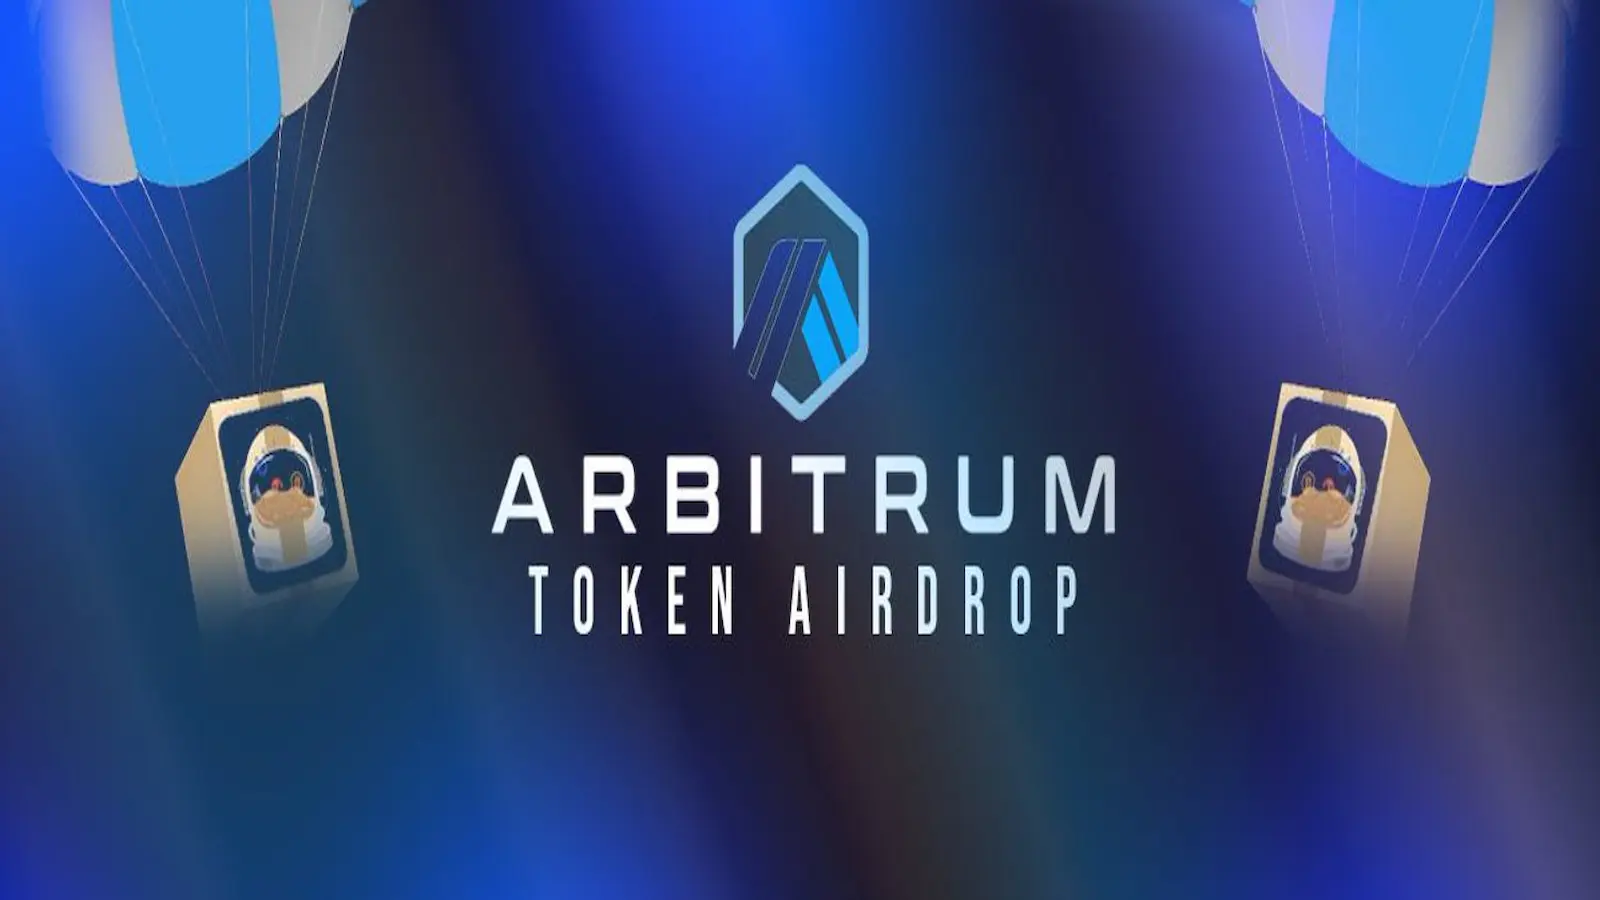 Arbitrum Token Listing And Airdrop Attract Buyers, But Caution Advised